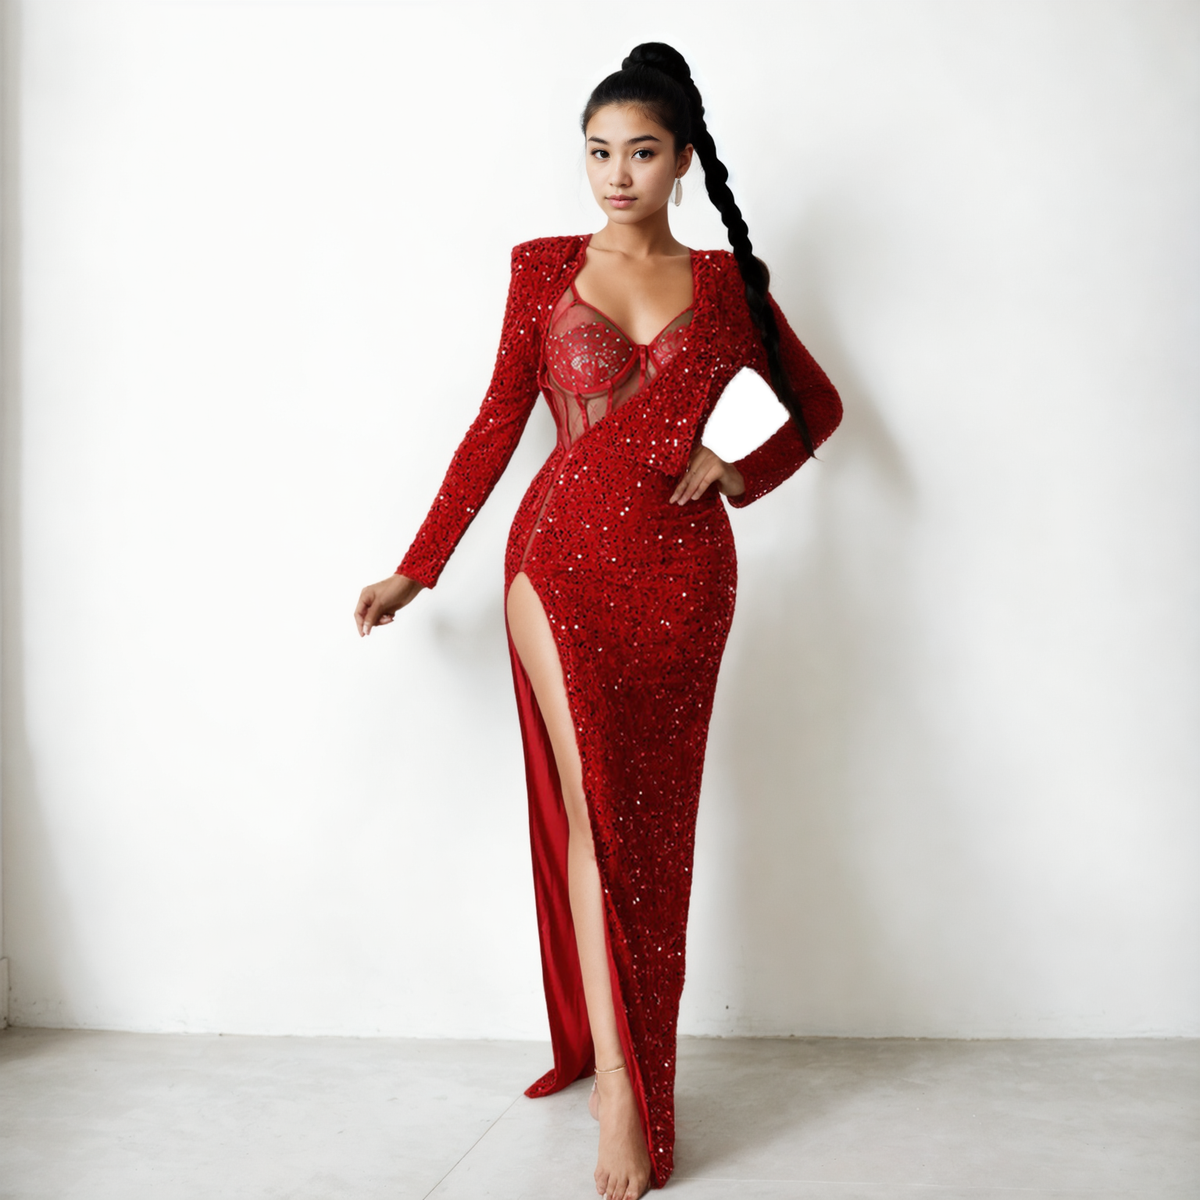 Chic Harmony: Sequin Maxi Dress with Slit - StylinArts